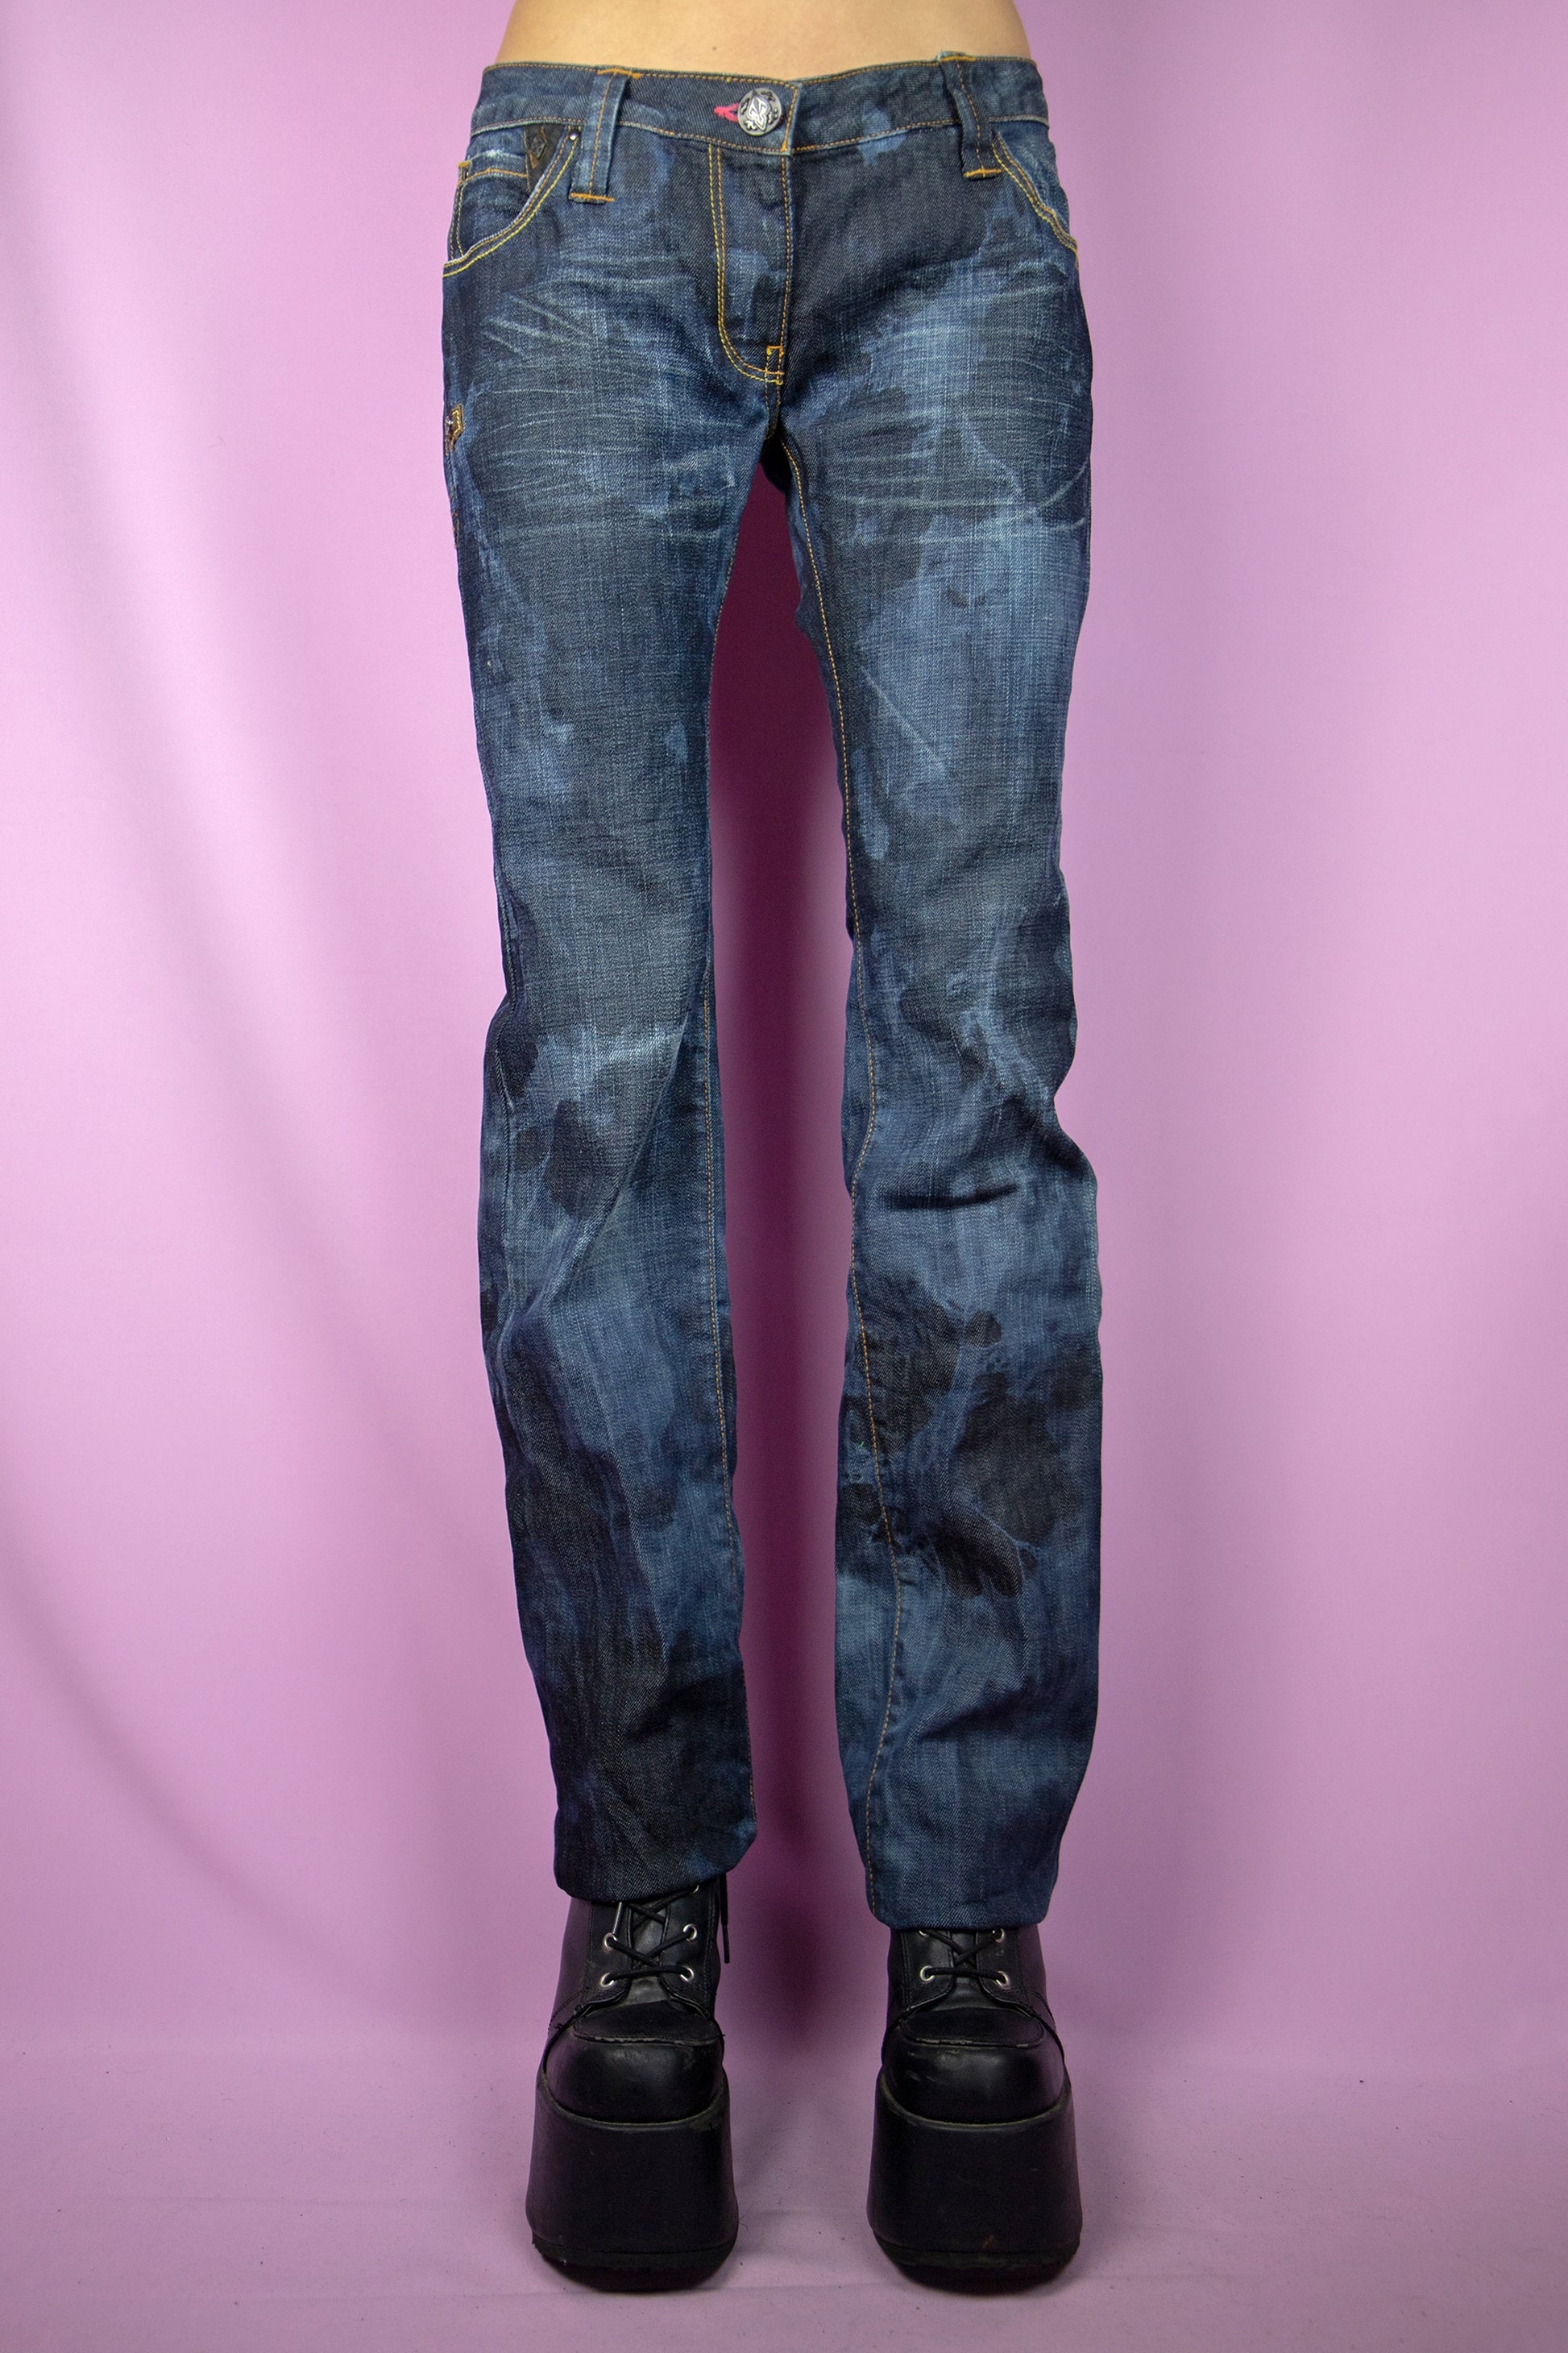 The Y2K Low Rise Bleach Jeans are vintage tie-dye bleached straight pants with pockets, a raw hem, and a subtle stretch. Cyber grunge 2000s dark denim pants.